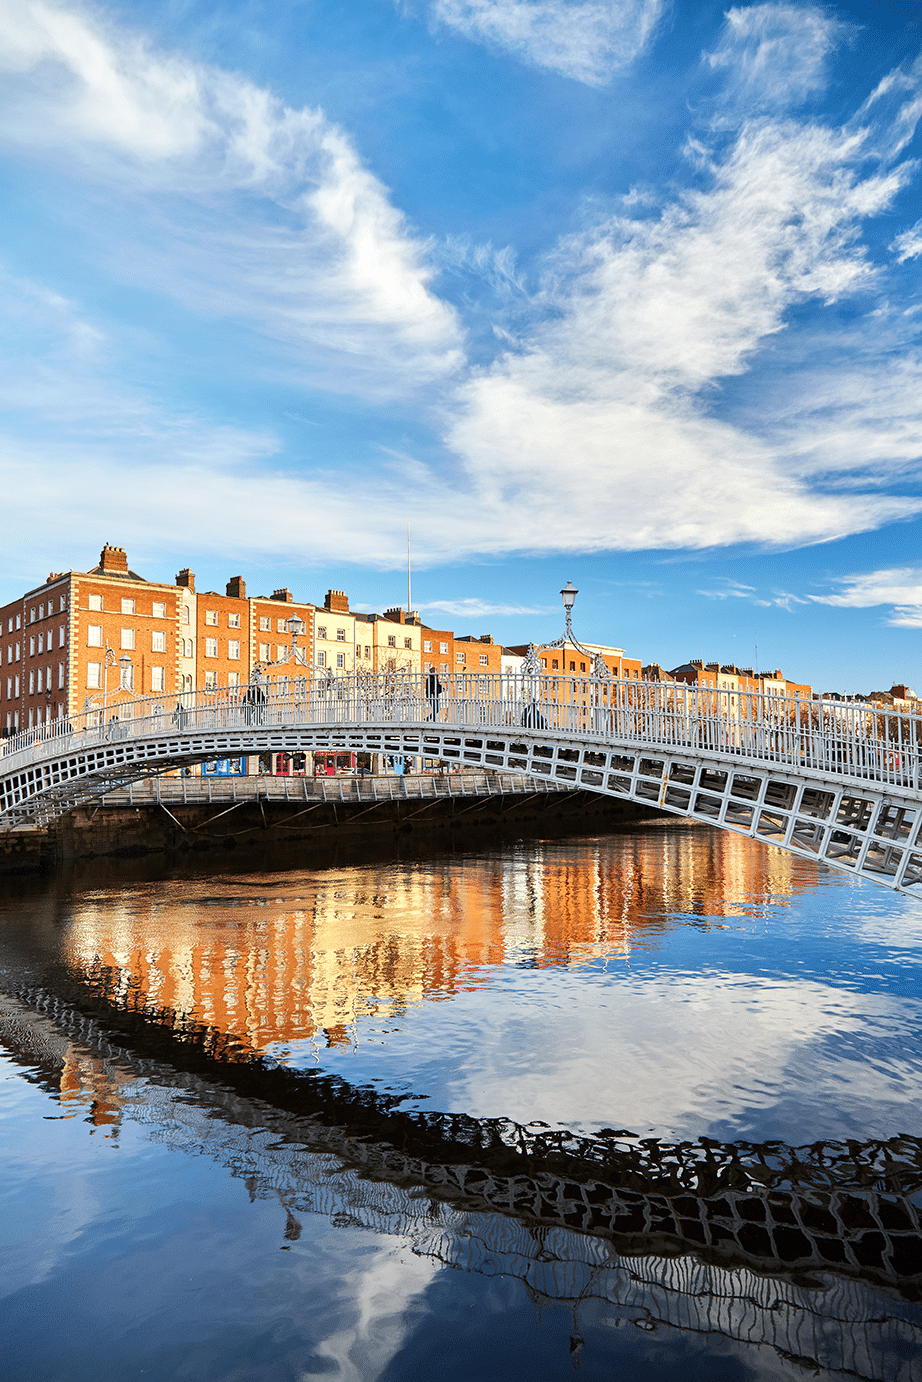 View of the Ha'penny Bridge over the River Liffey in Dublin, Ireland, with historic buildings reflected in the water under a blue sky to boost your website's SEO.

